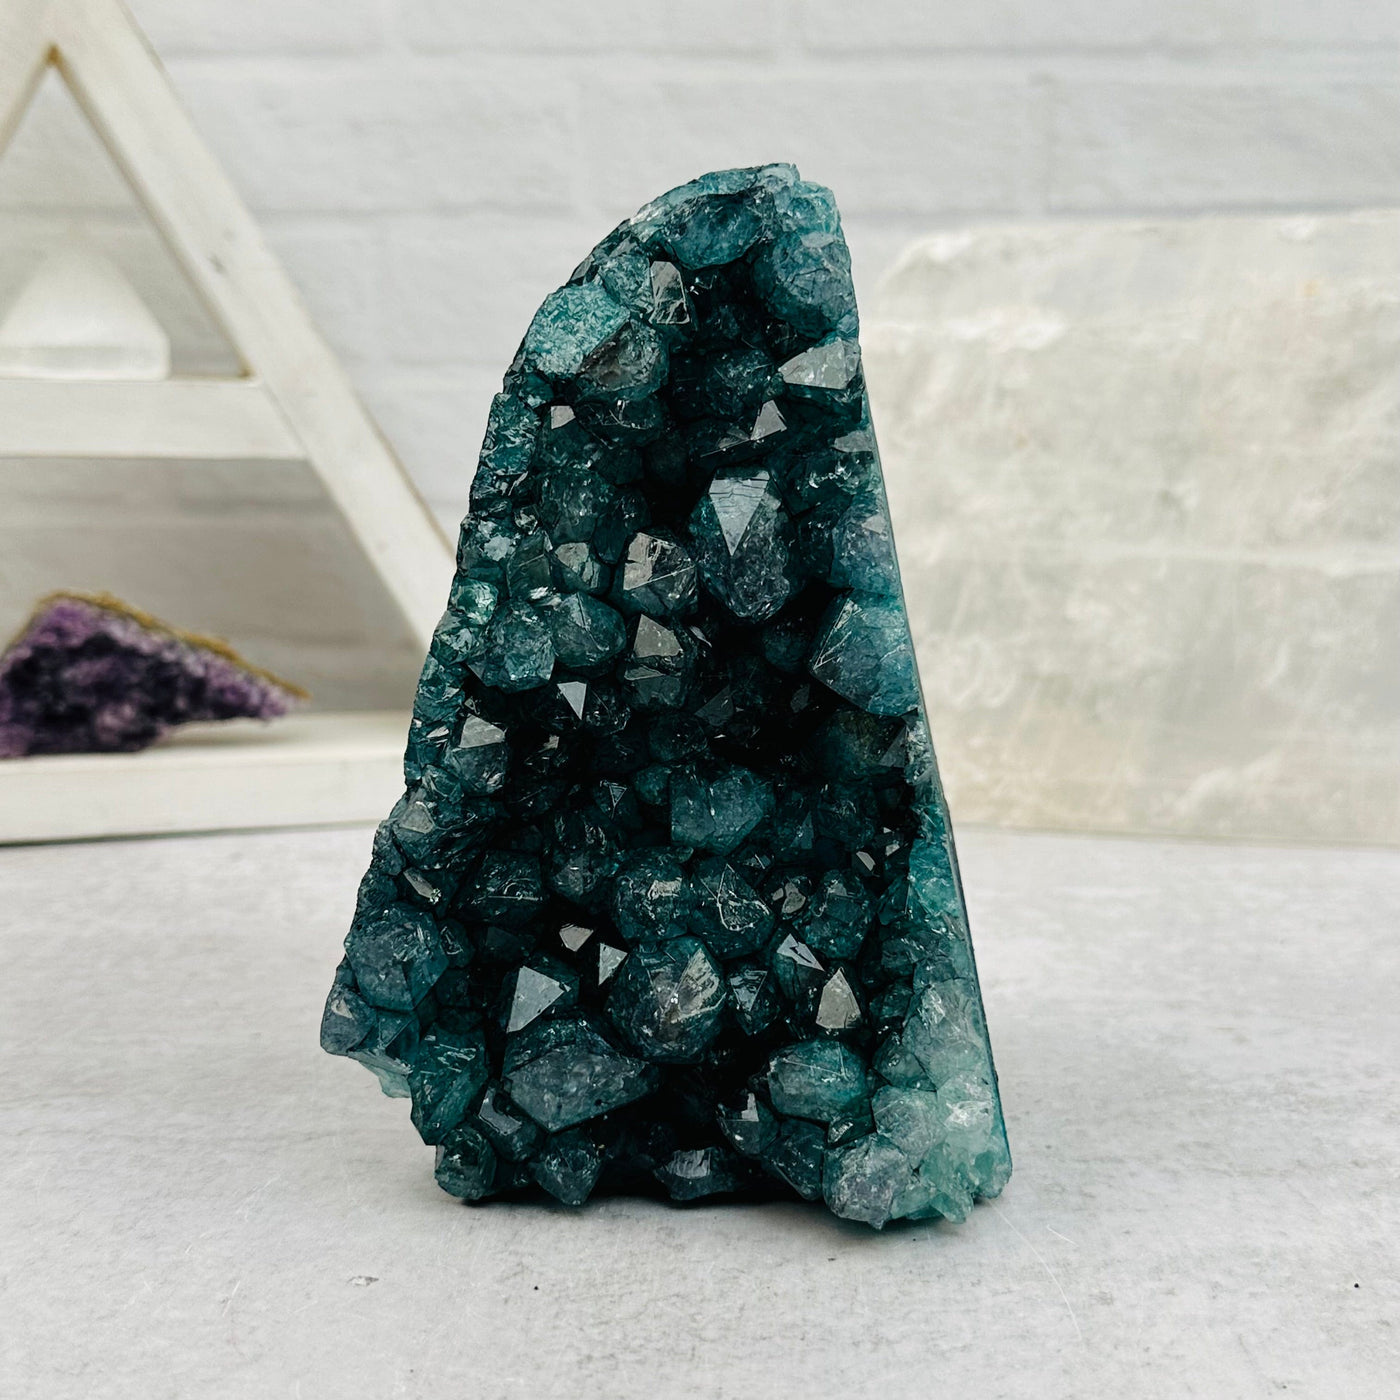 dyed green Amethyst Crystal Cluster CutBase displayed as home decor 